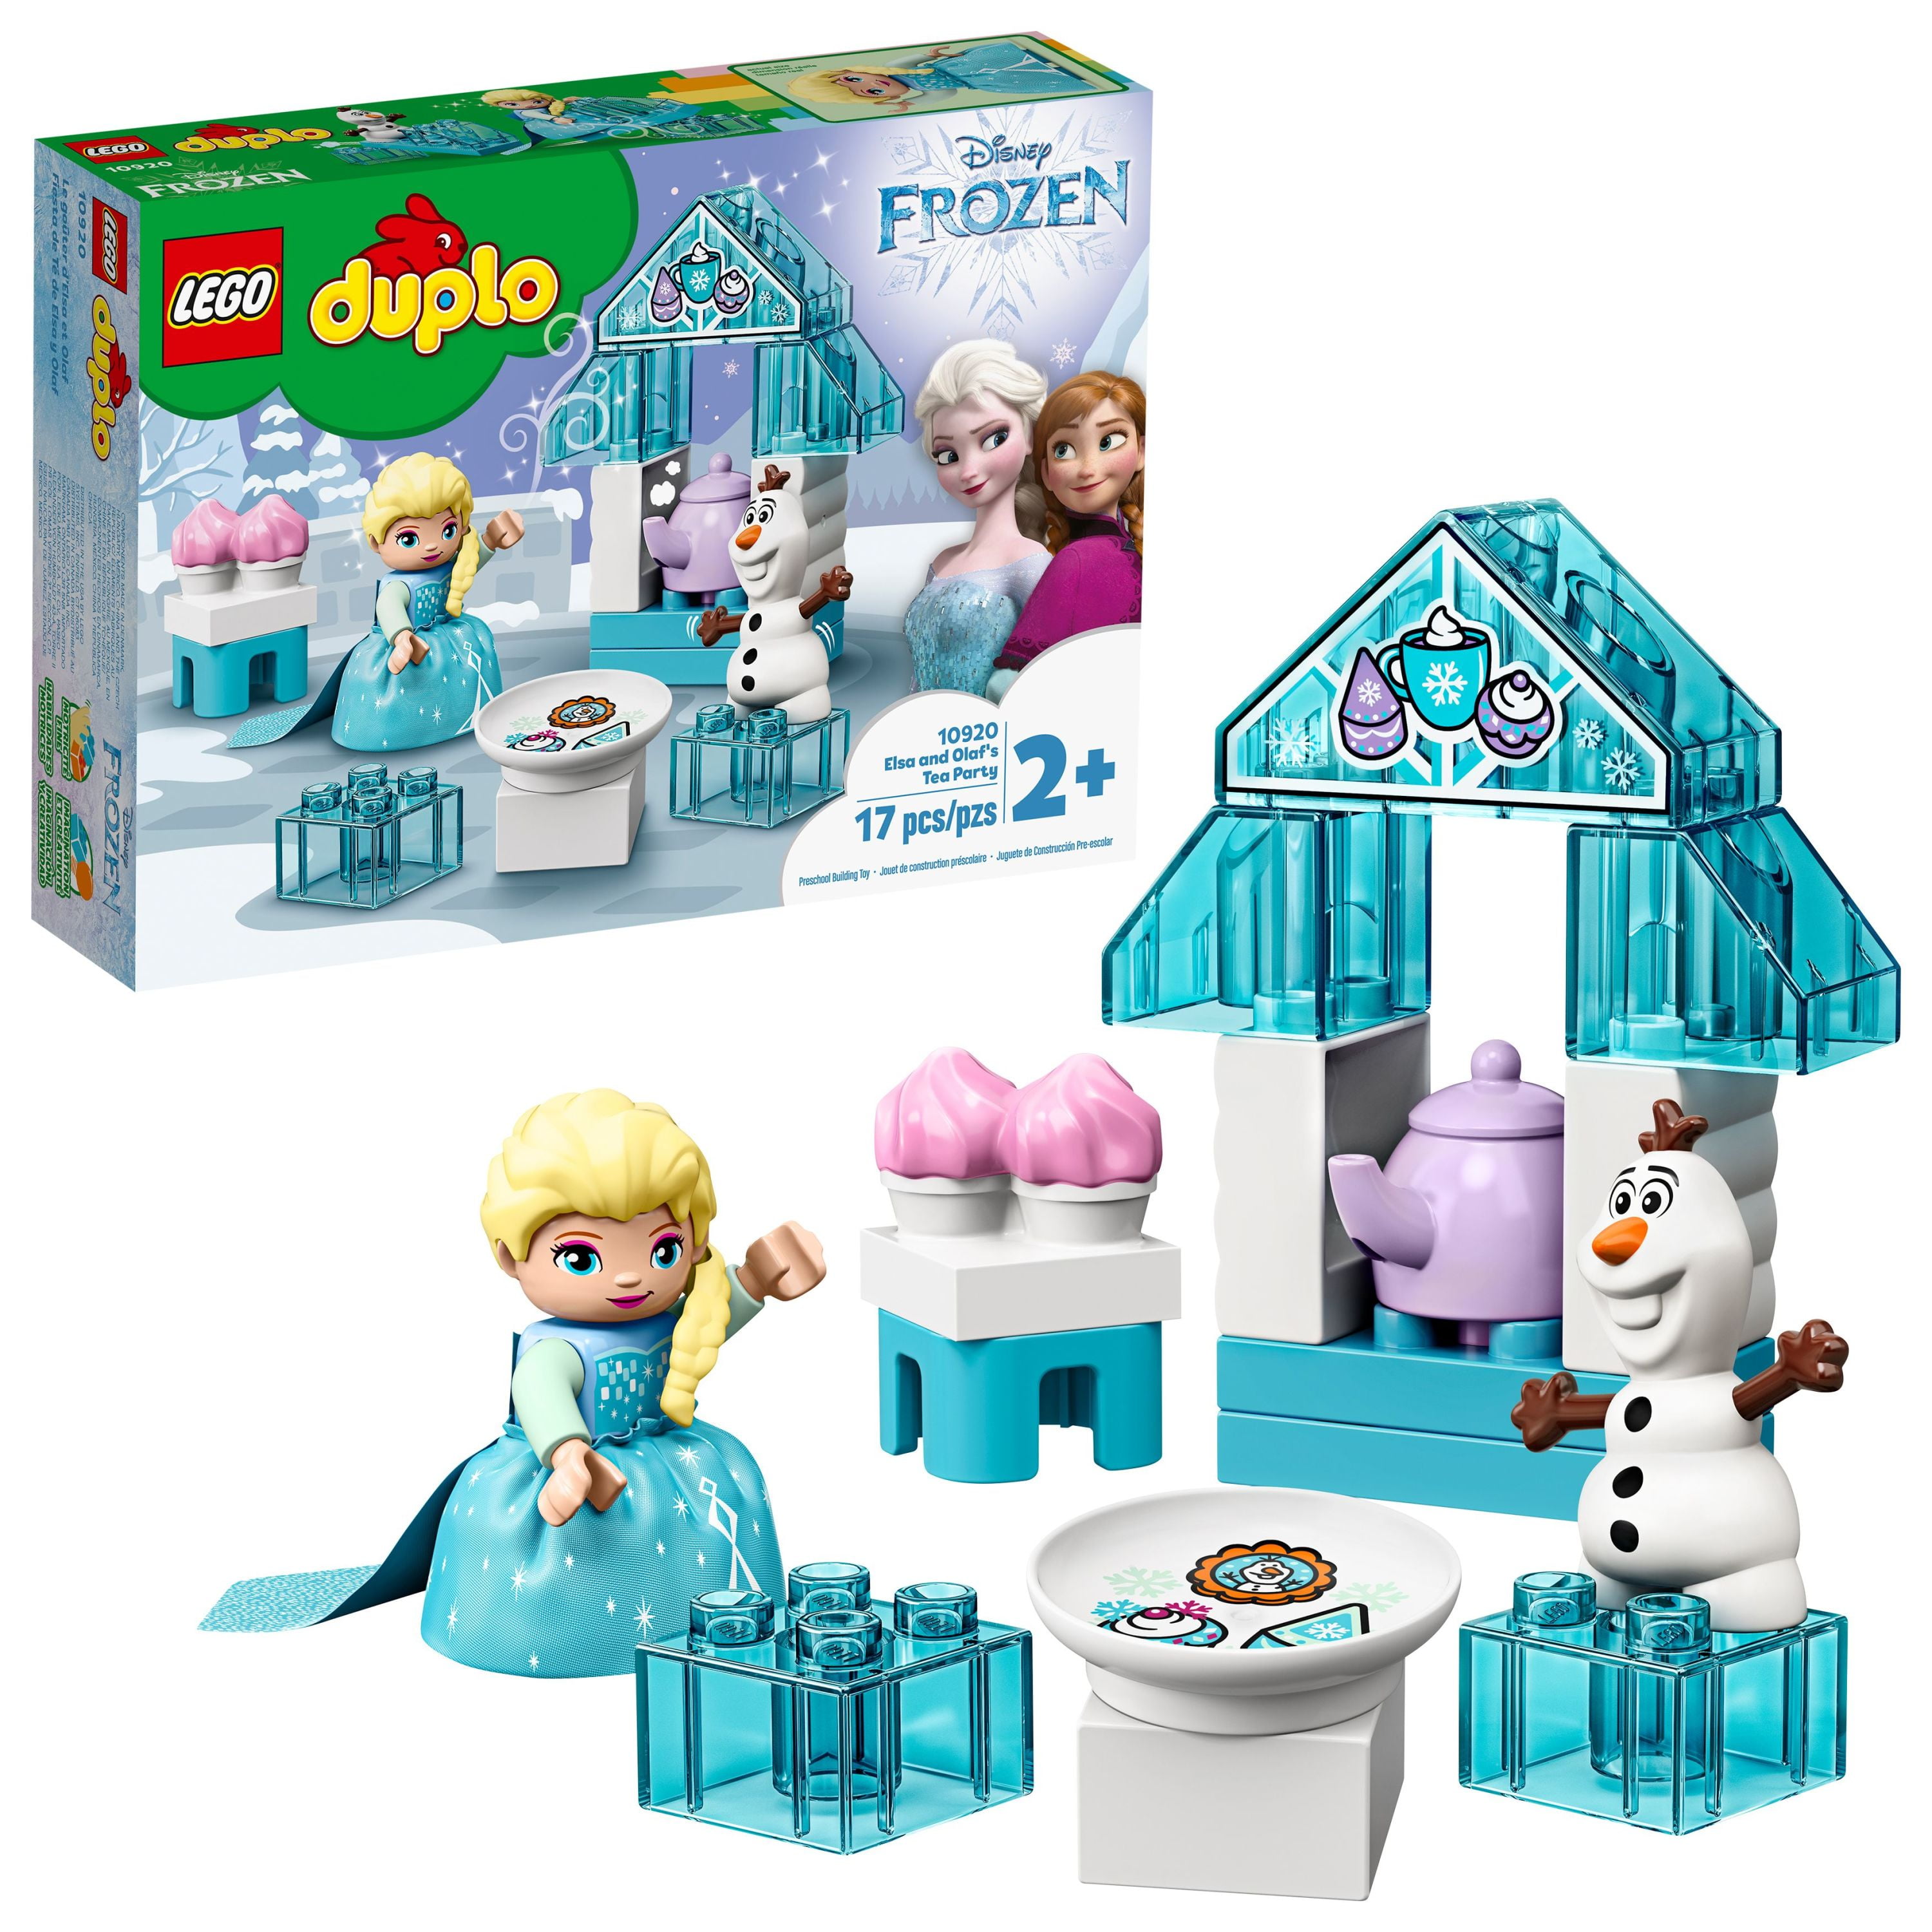 LEGO DUPLO Disney and Olaf's Tea Party 10920 Building Kit for (17 Pieces) - Walmart.com